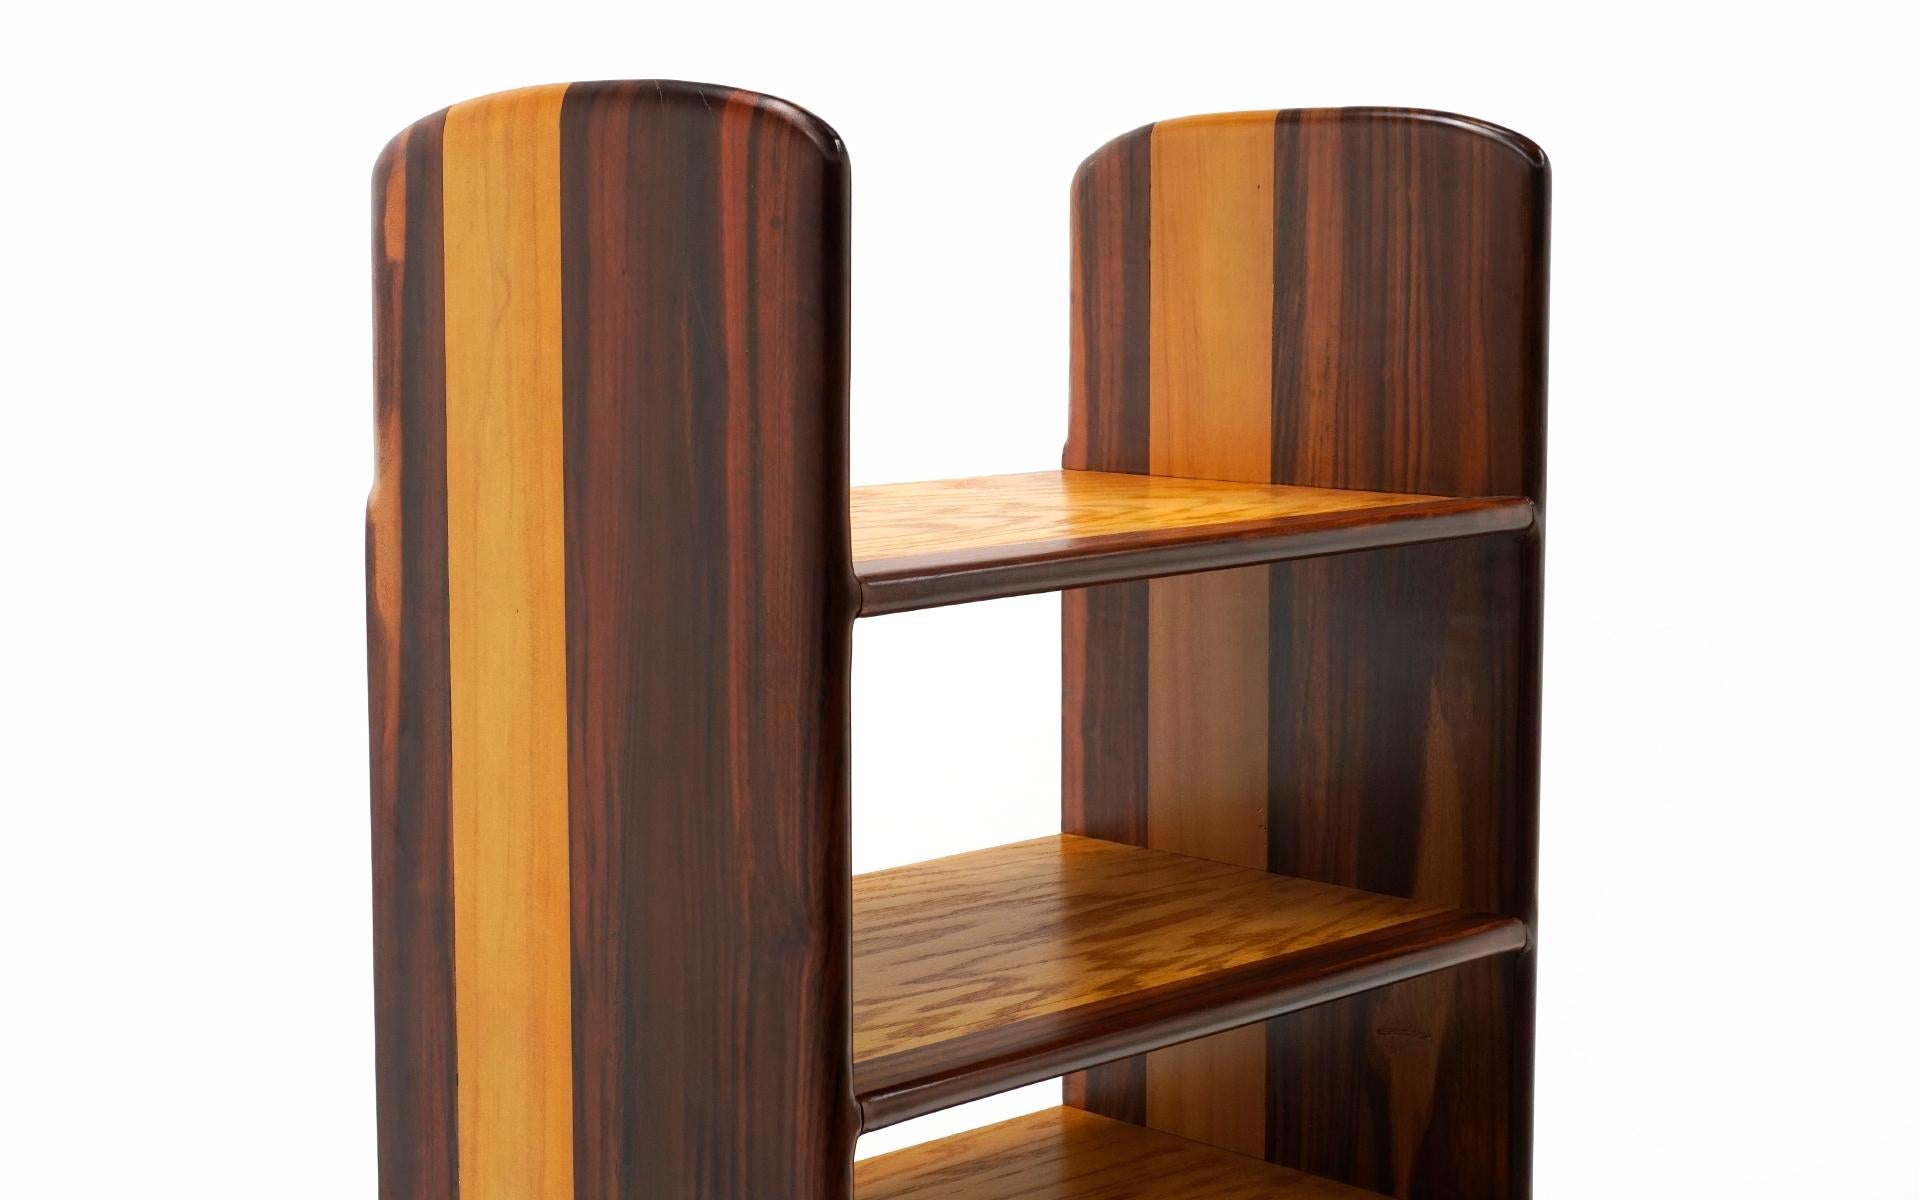 One of a kind studio craft bookcase made of Brazilian rosewood. Refinished and structurally sound. A good repair has been done to one of the 